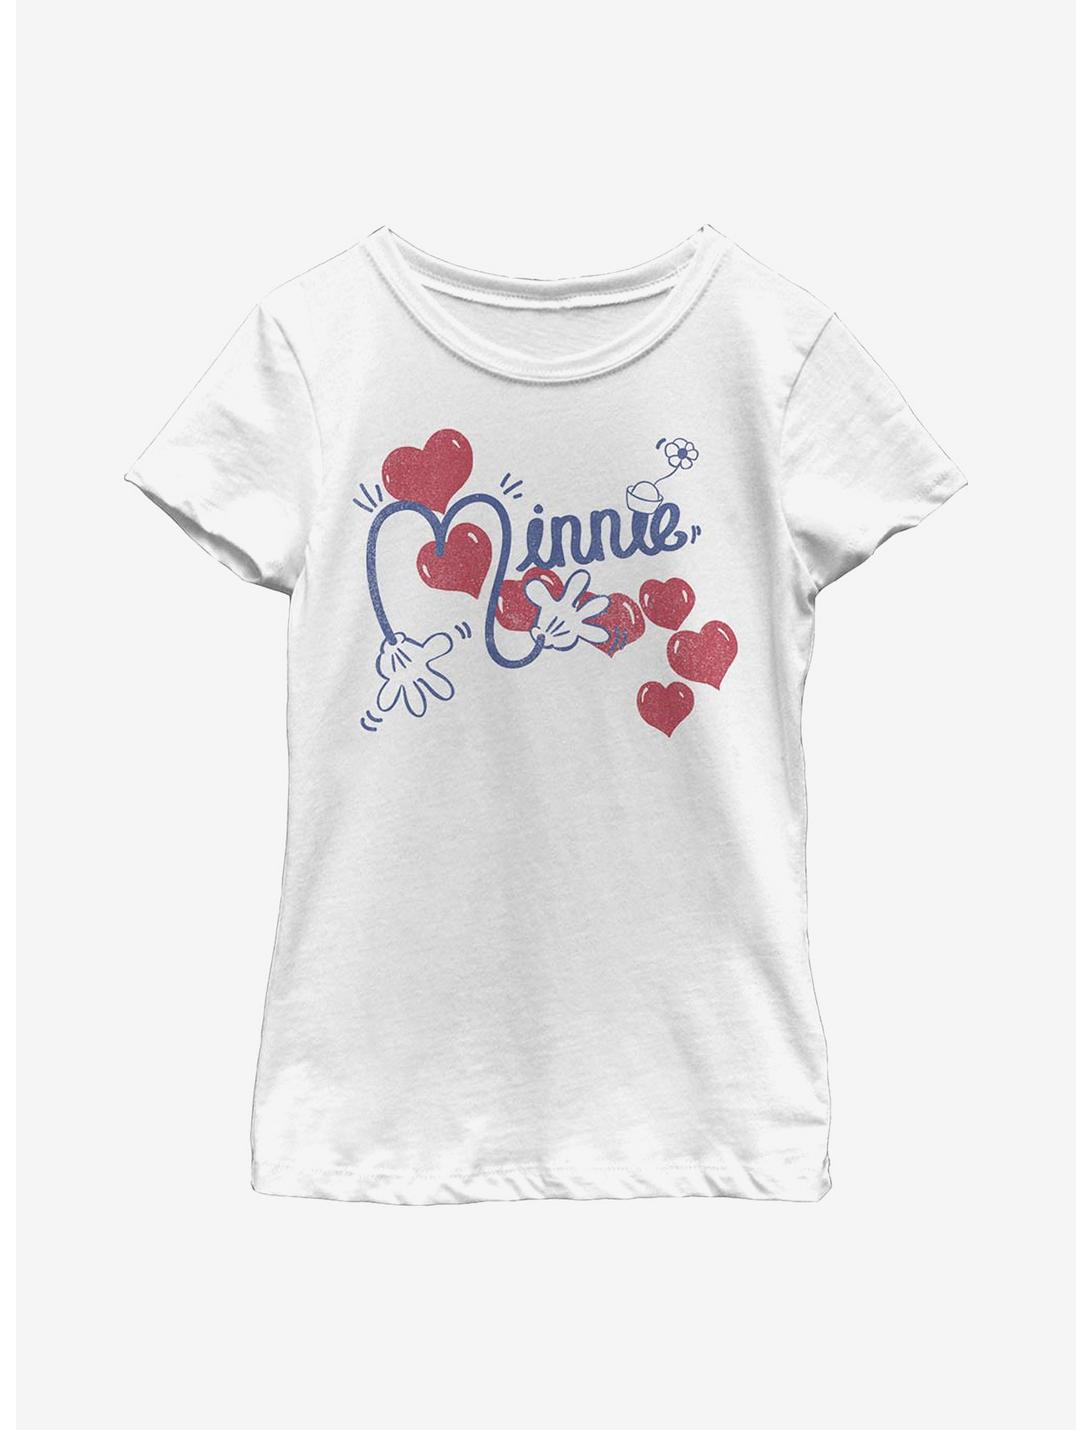 Disney Minnie Mouse Hearts Script Youth Girls T-Shirt, WHITE, hi-res